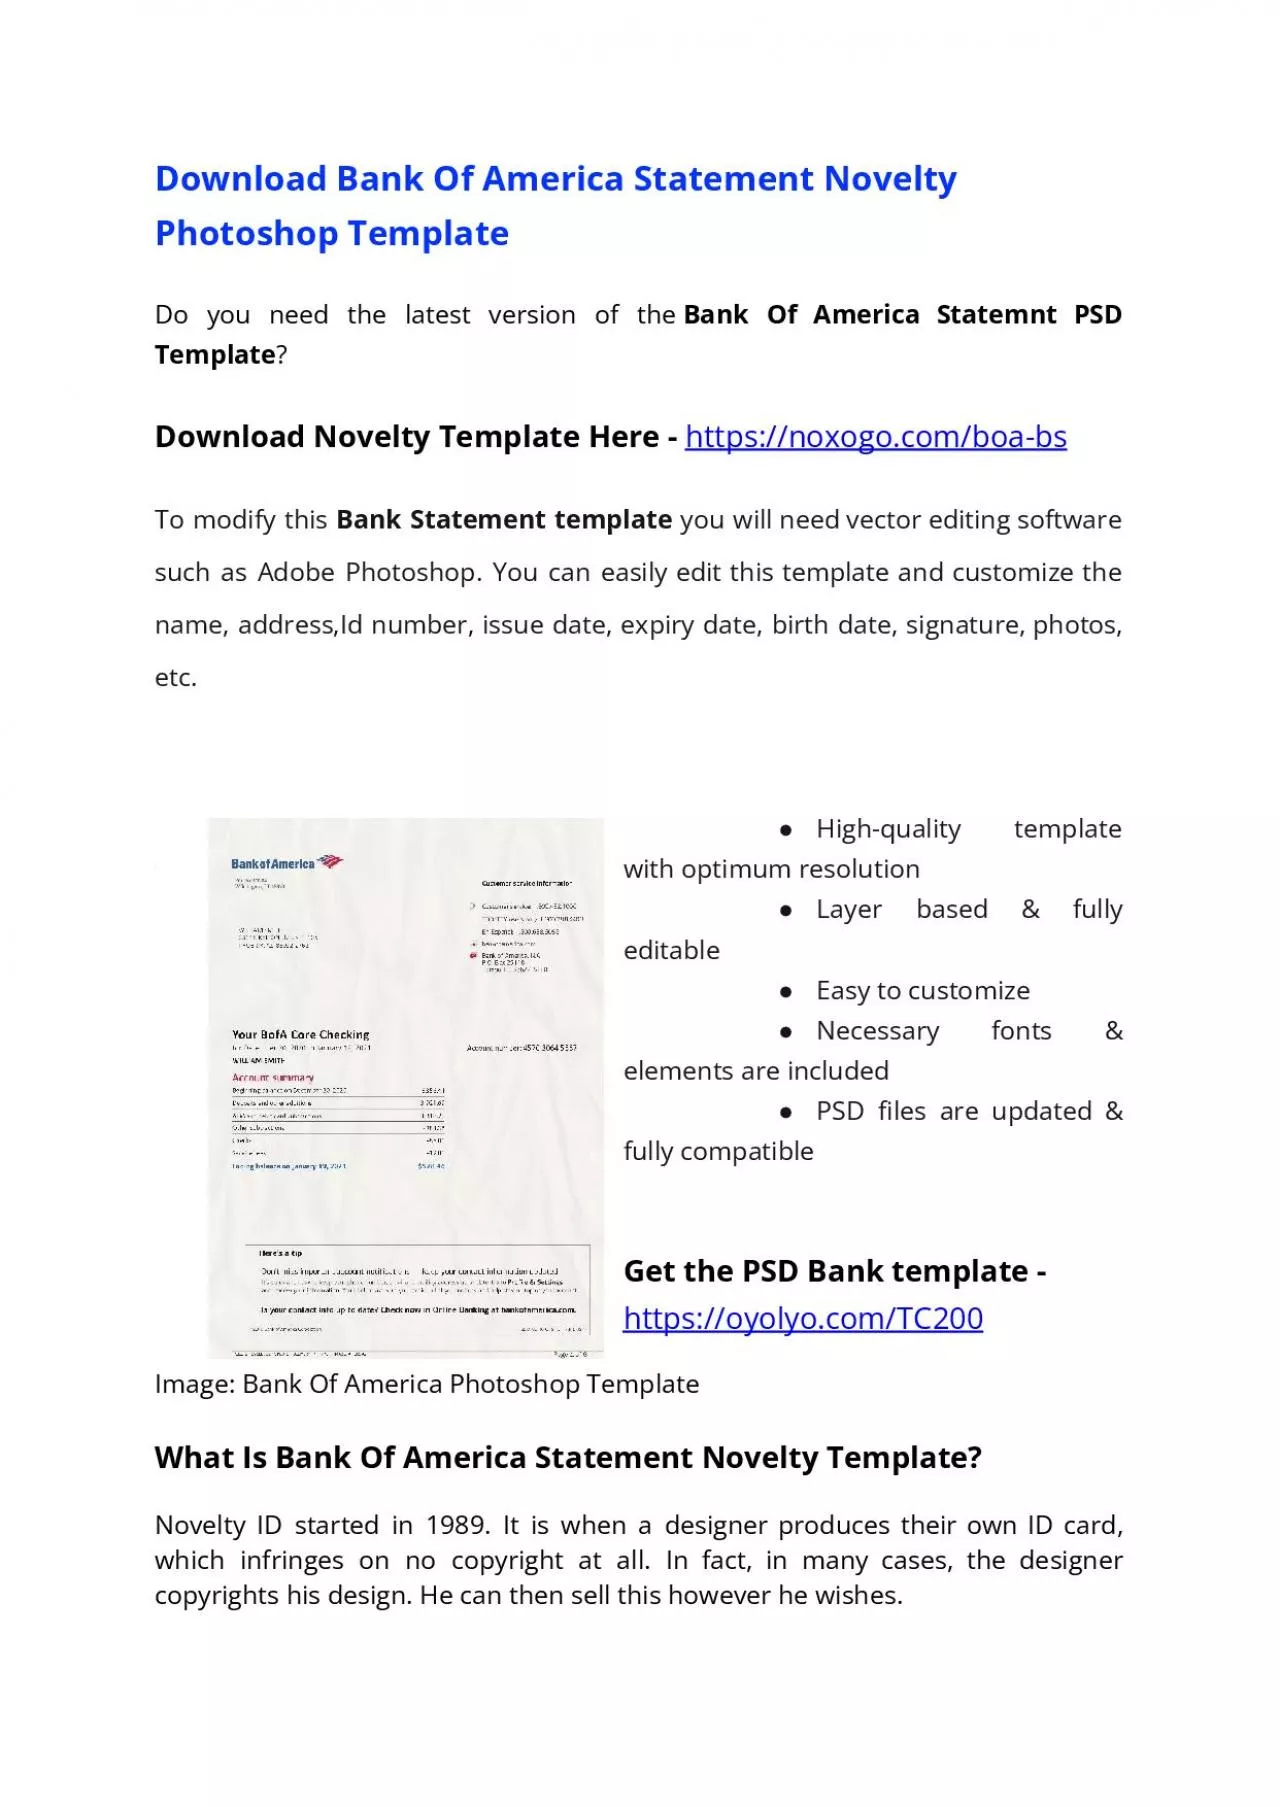 Bank of America Statement PSD Template – Download Photoshop File